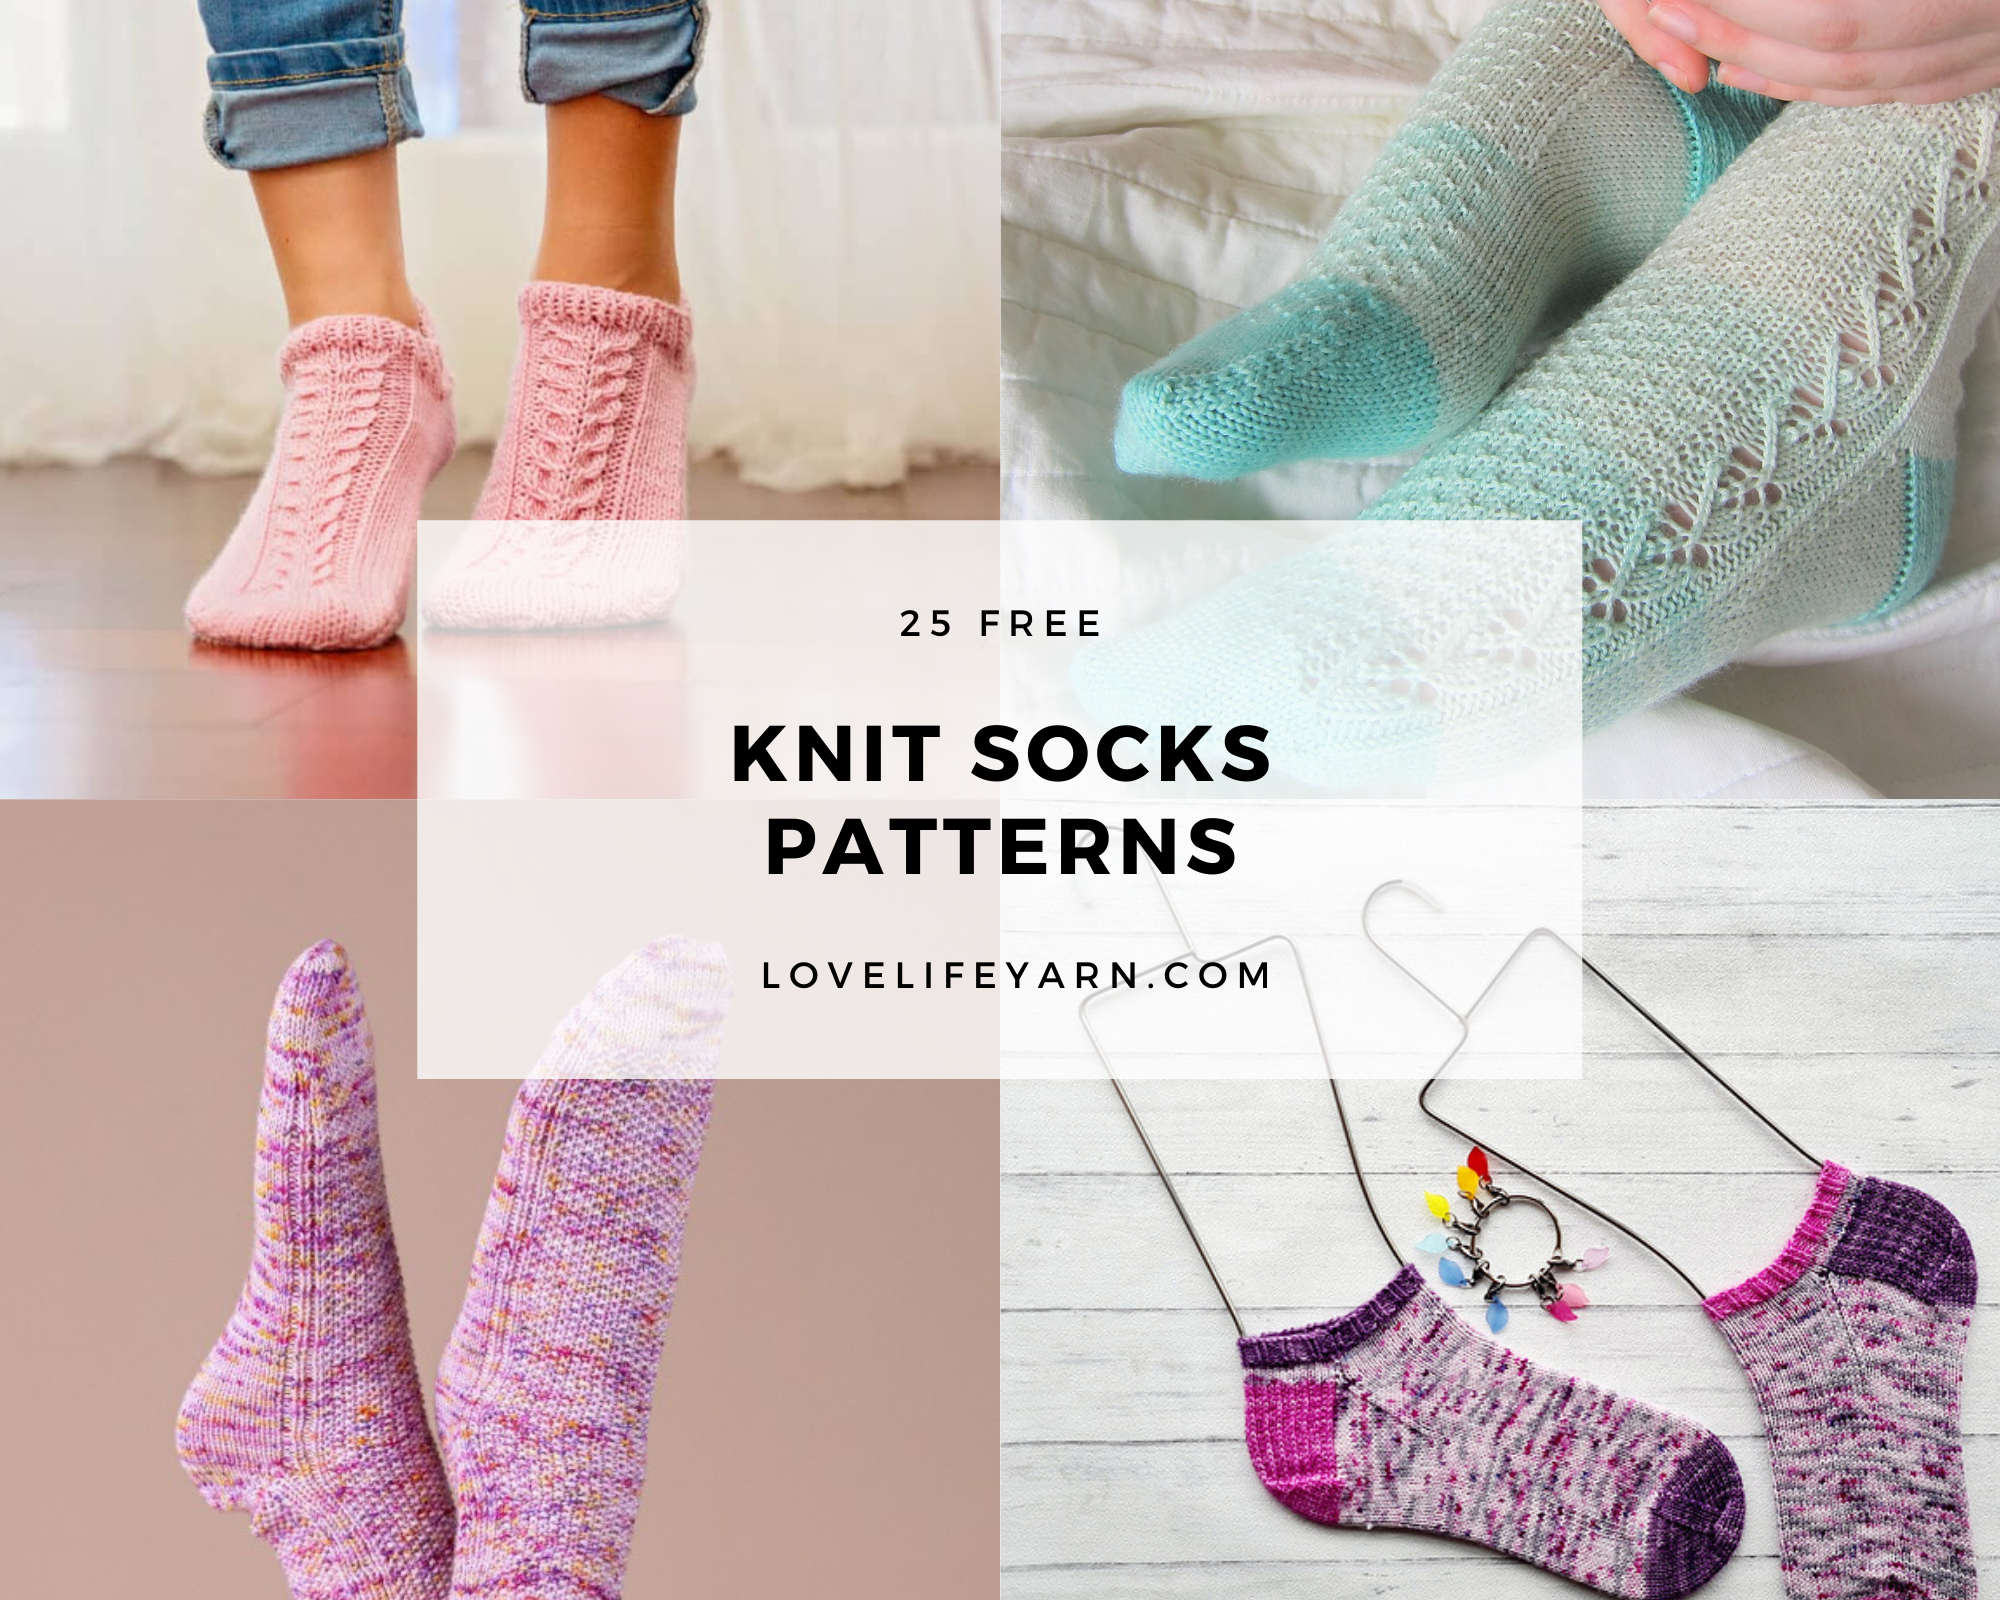 Cozy Up with Our Top 25 Free Knit Socks Patterns – Start Crafting